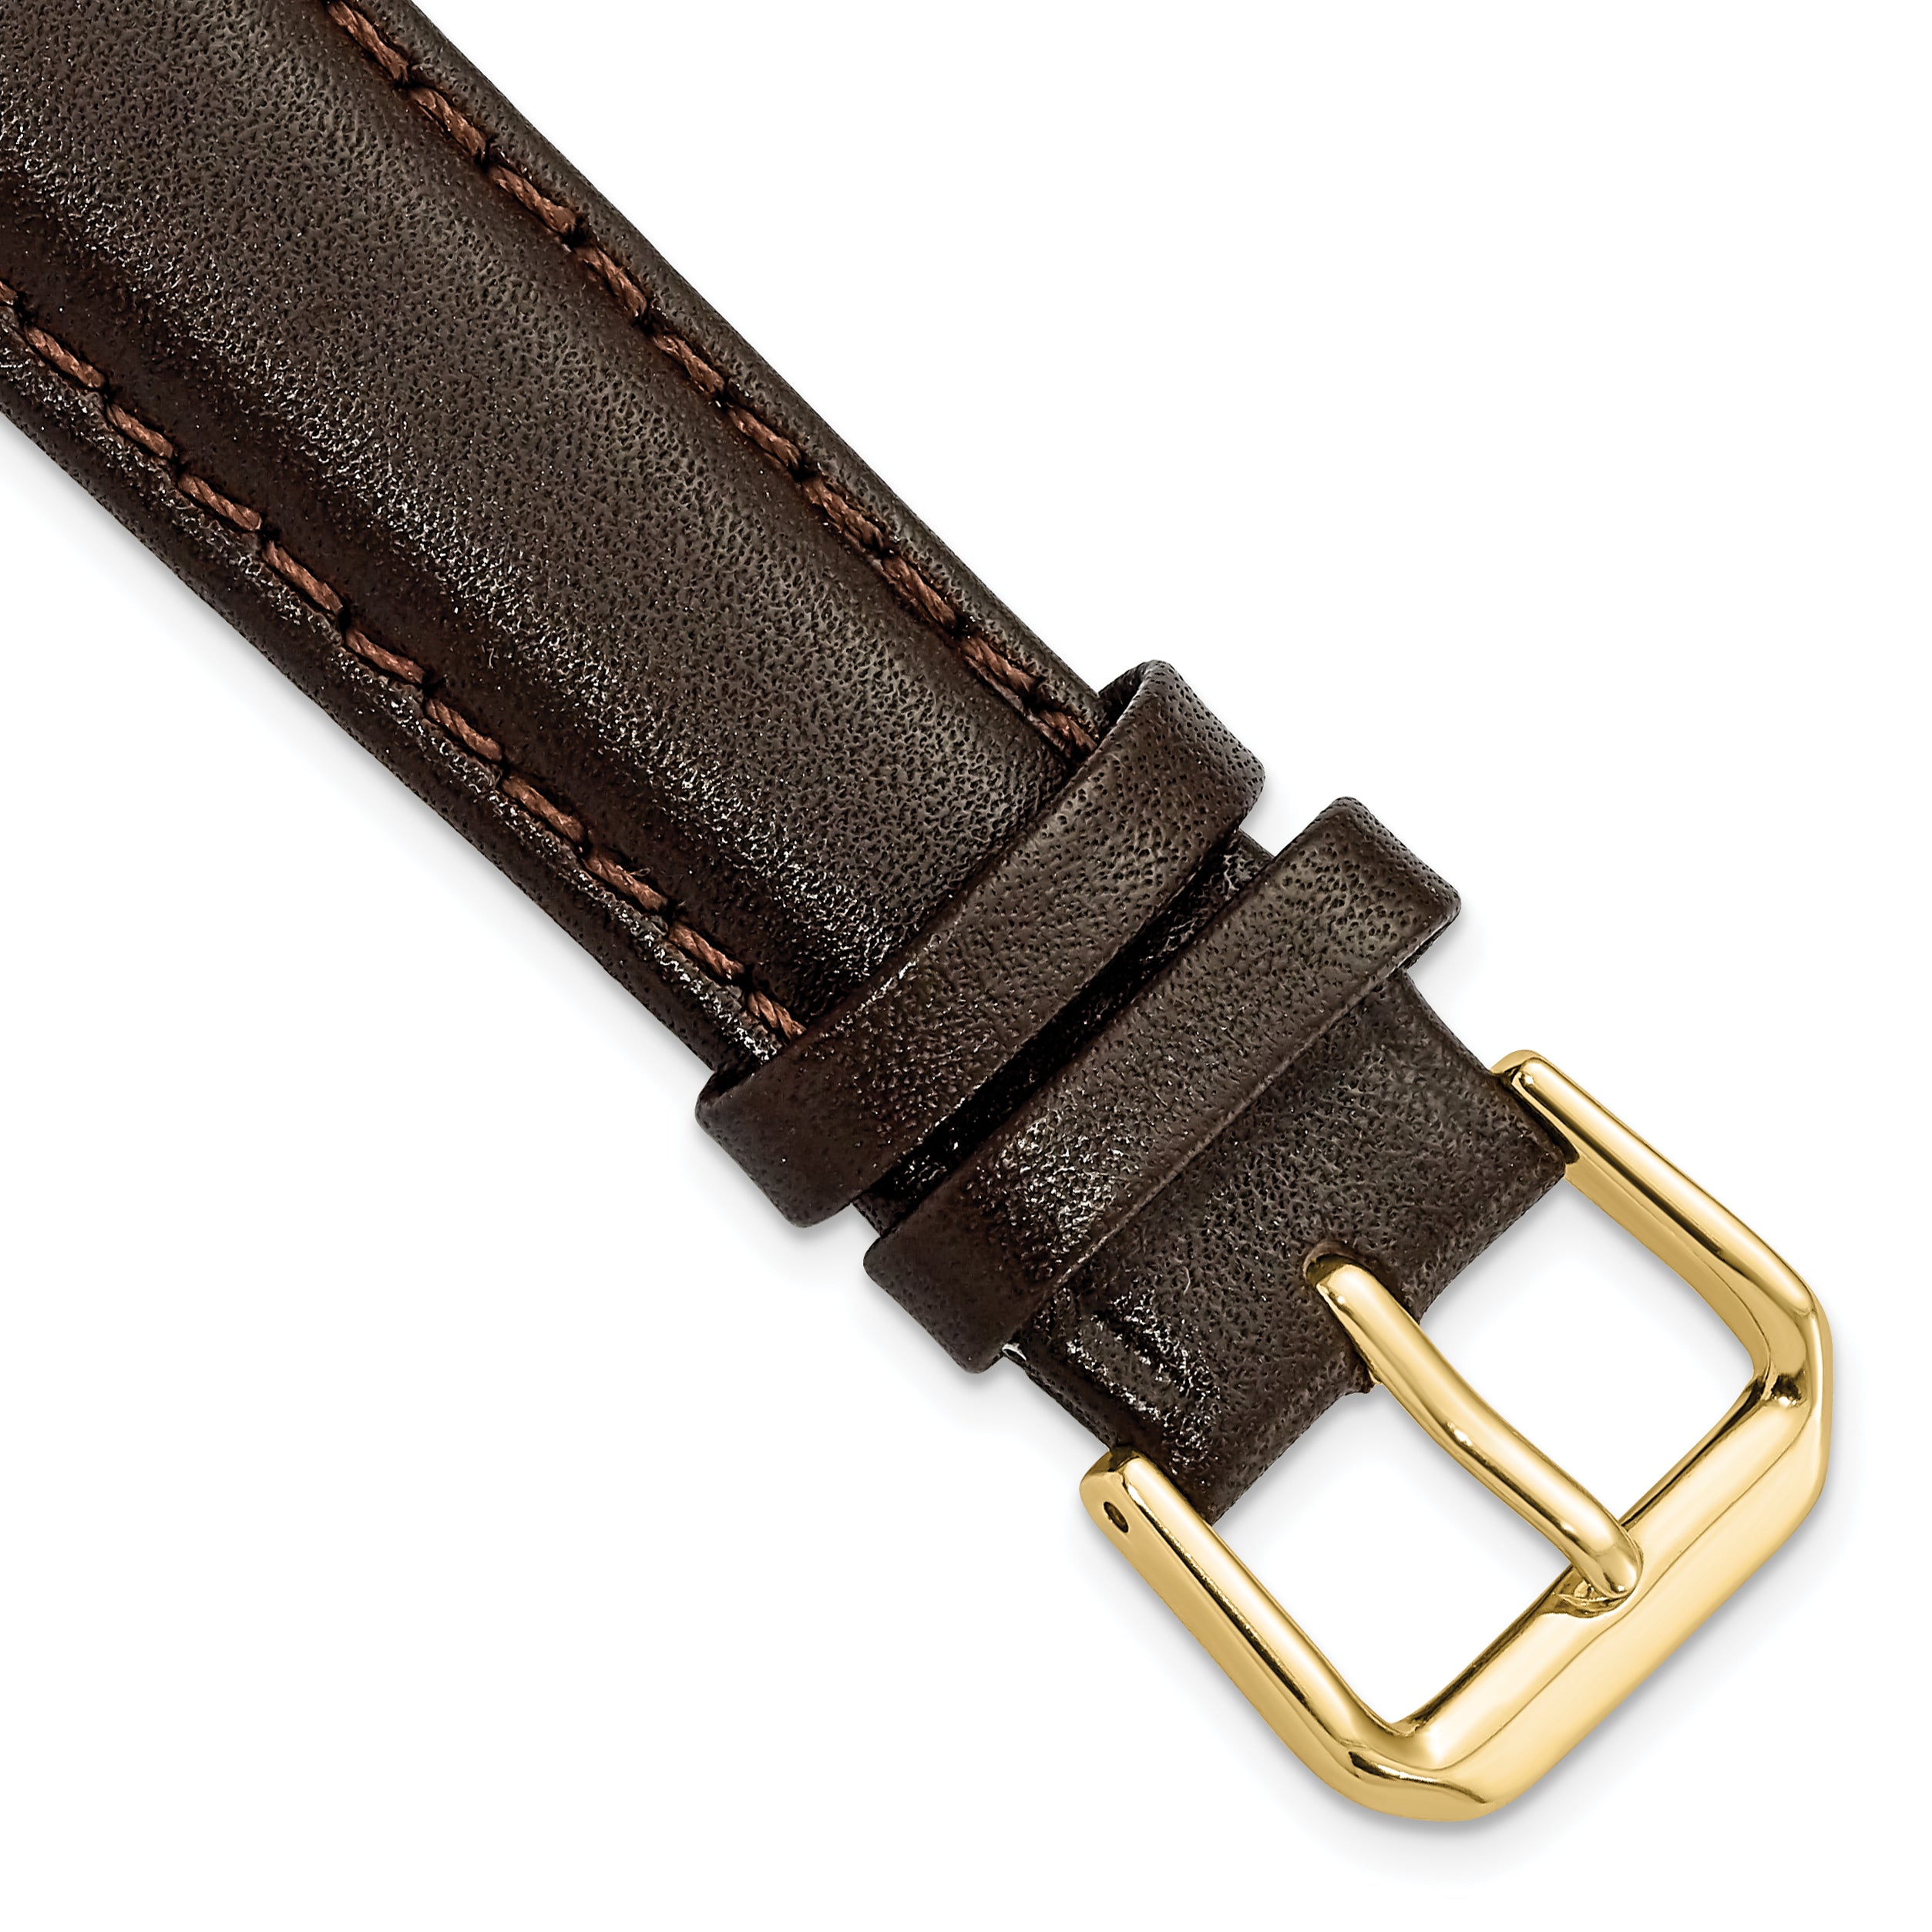 DeBeer 18mm Short Dark Brown Smooth Leather with Gold-tone Buckle 6.75 inch Watch Band